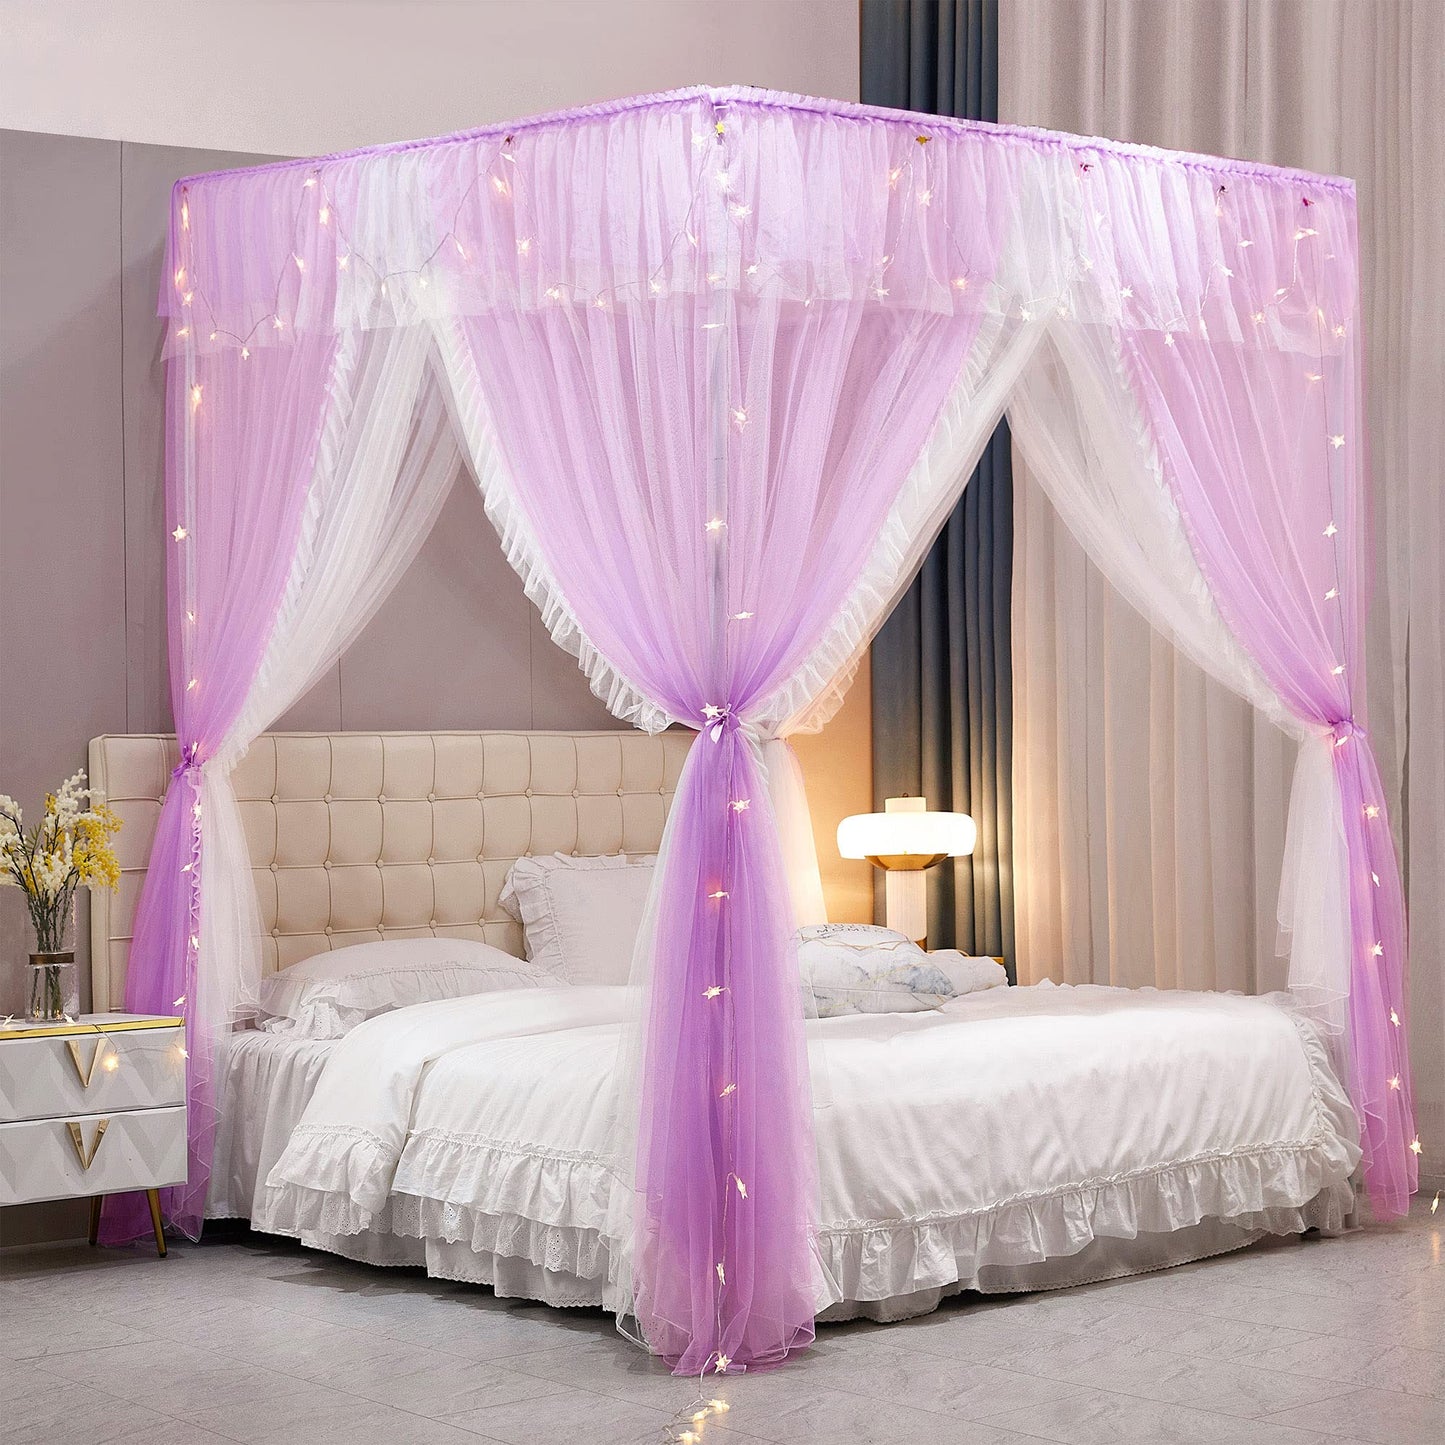 VETHIN 4 Corners Post Ruffle Princess Bed Canopy Curtain-Double Layer Cozy Drape Netting 4 Opening Mosquito Net for Girls Adults Bedroom Decoration (Double-Purple, 59" W*82" L*82"*H/(Queen))